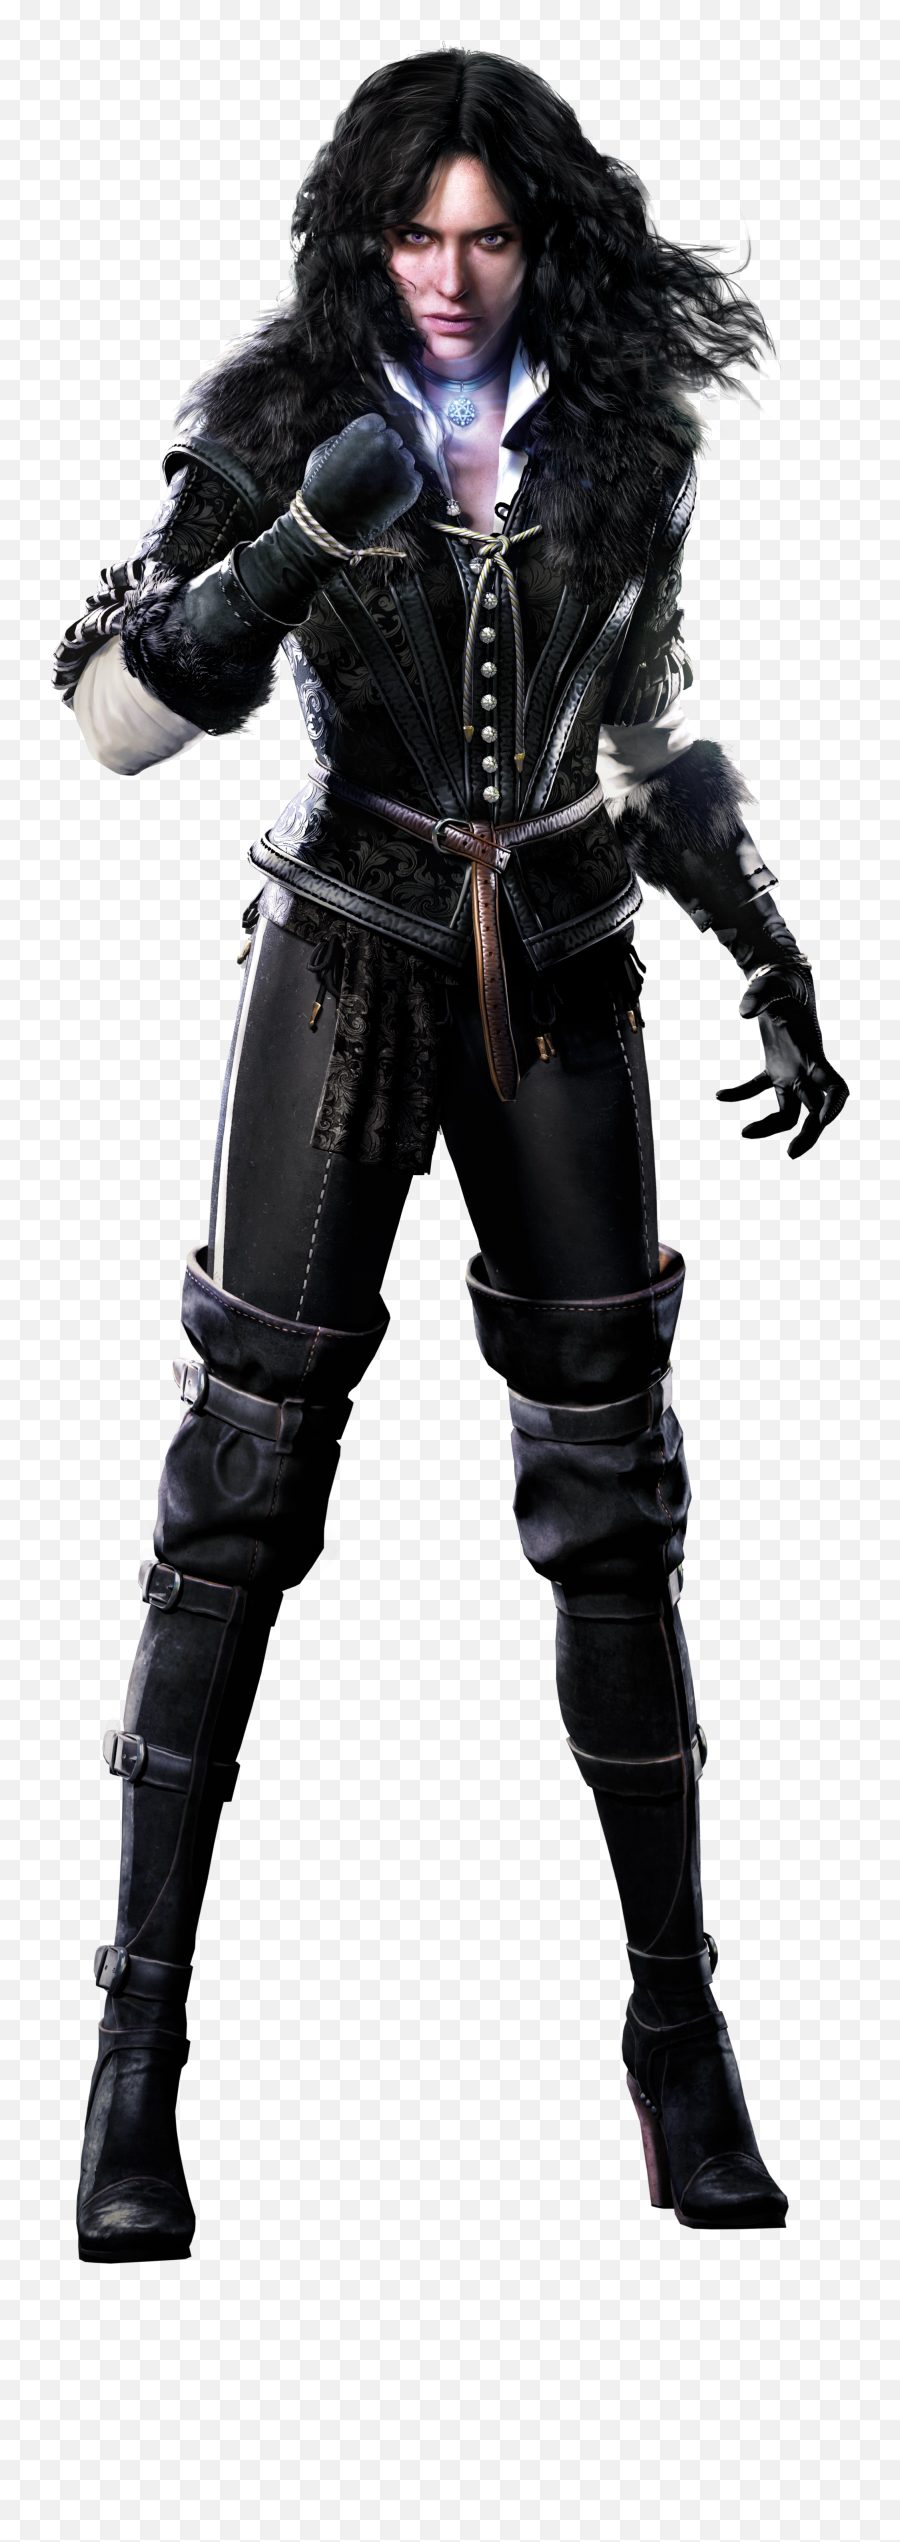 Witcher Png Transparent The - Yennefer Witcher,Witcher Png